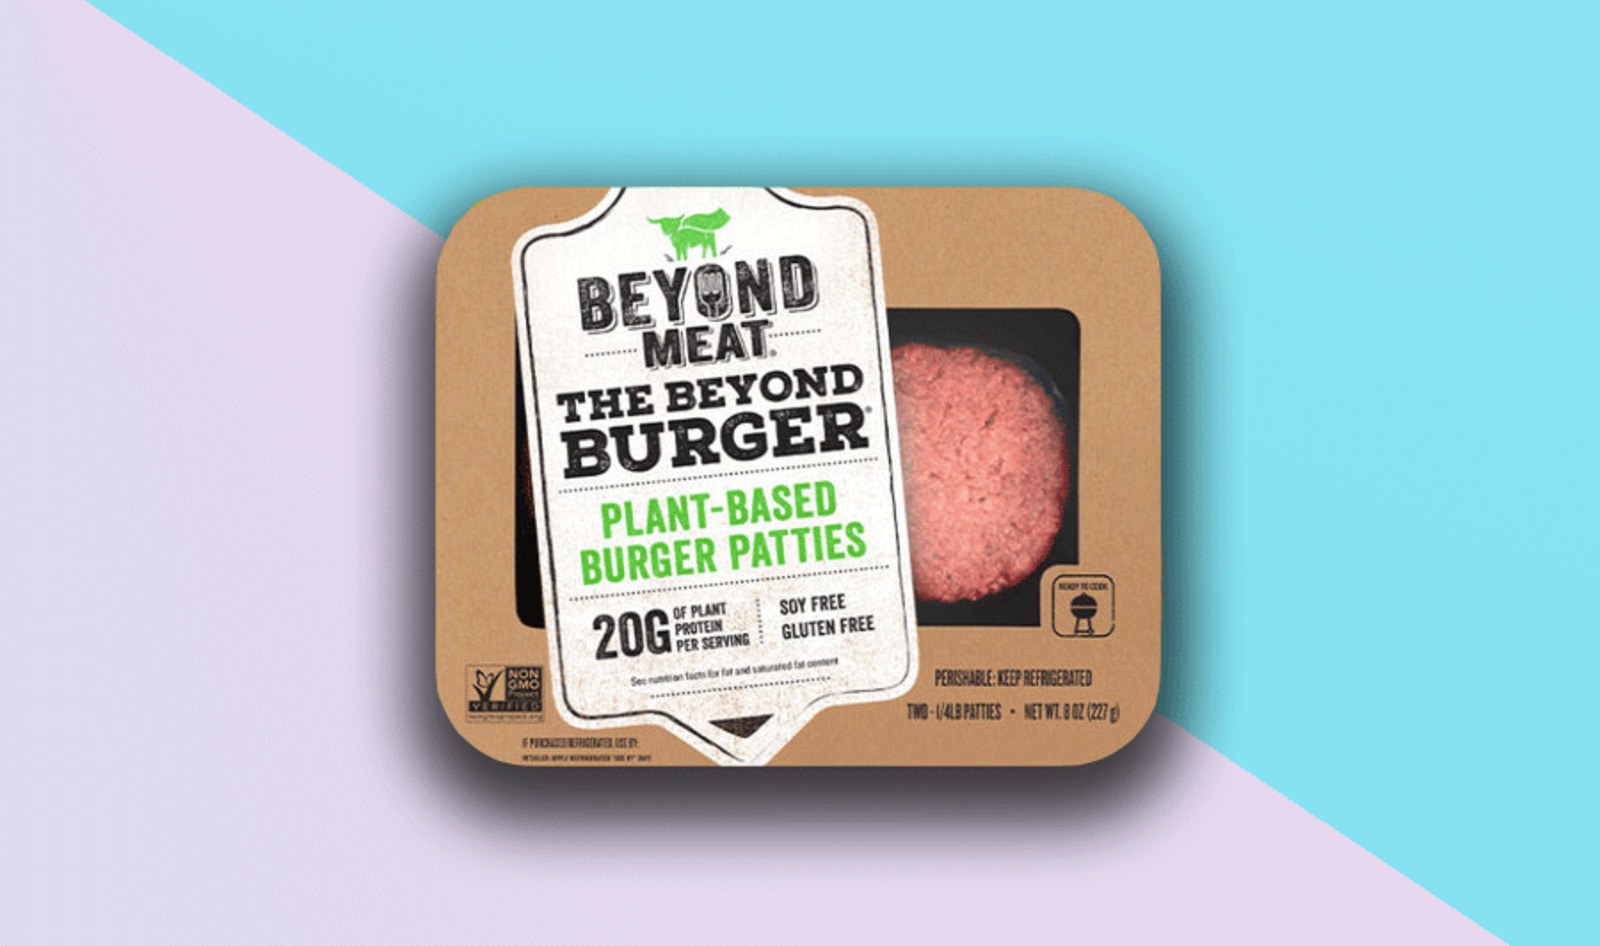 Senior Executive Leaves Tesla to Join Beyond Meat